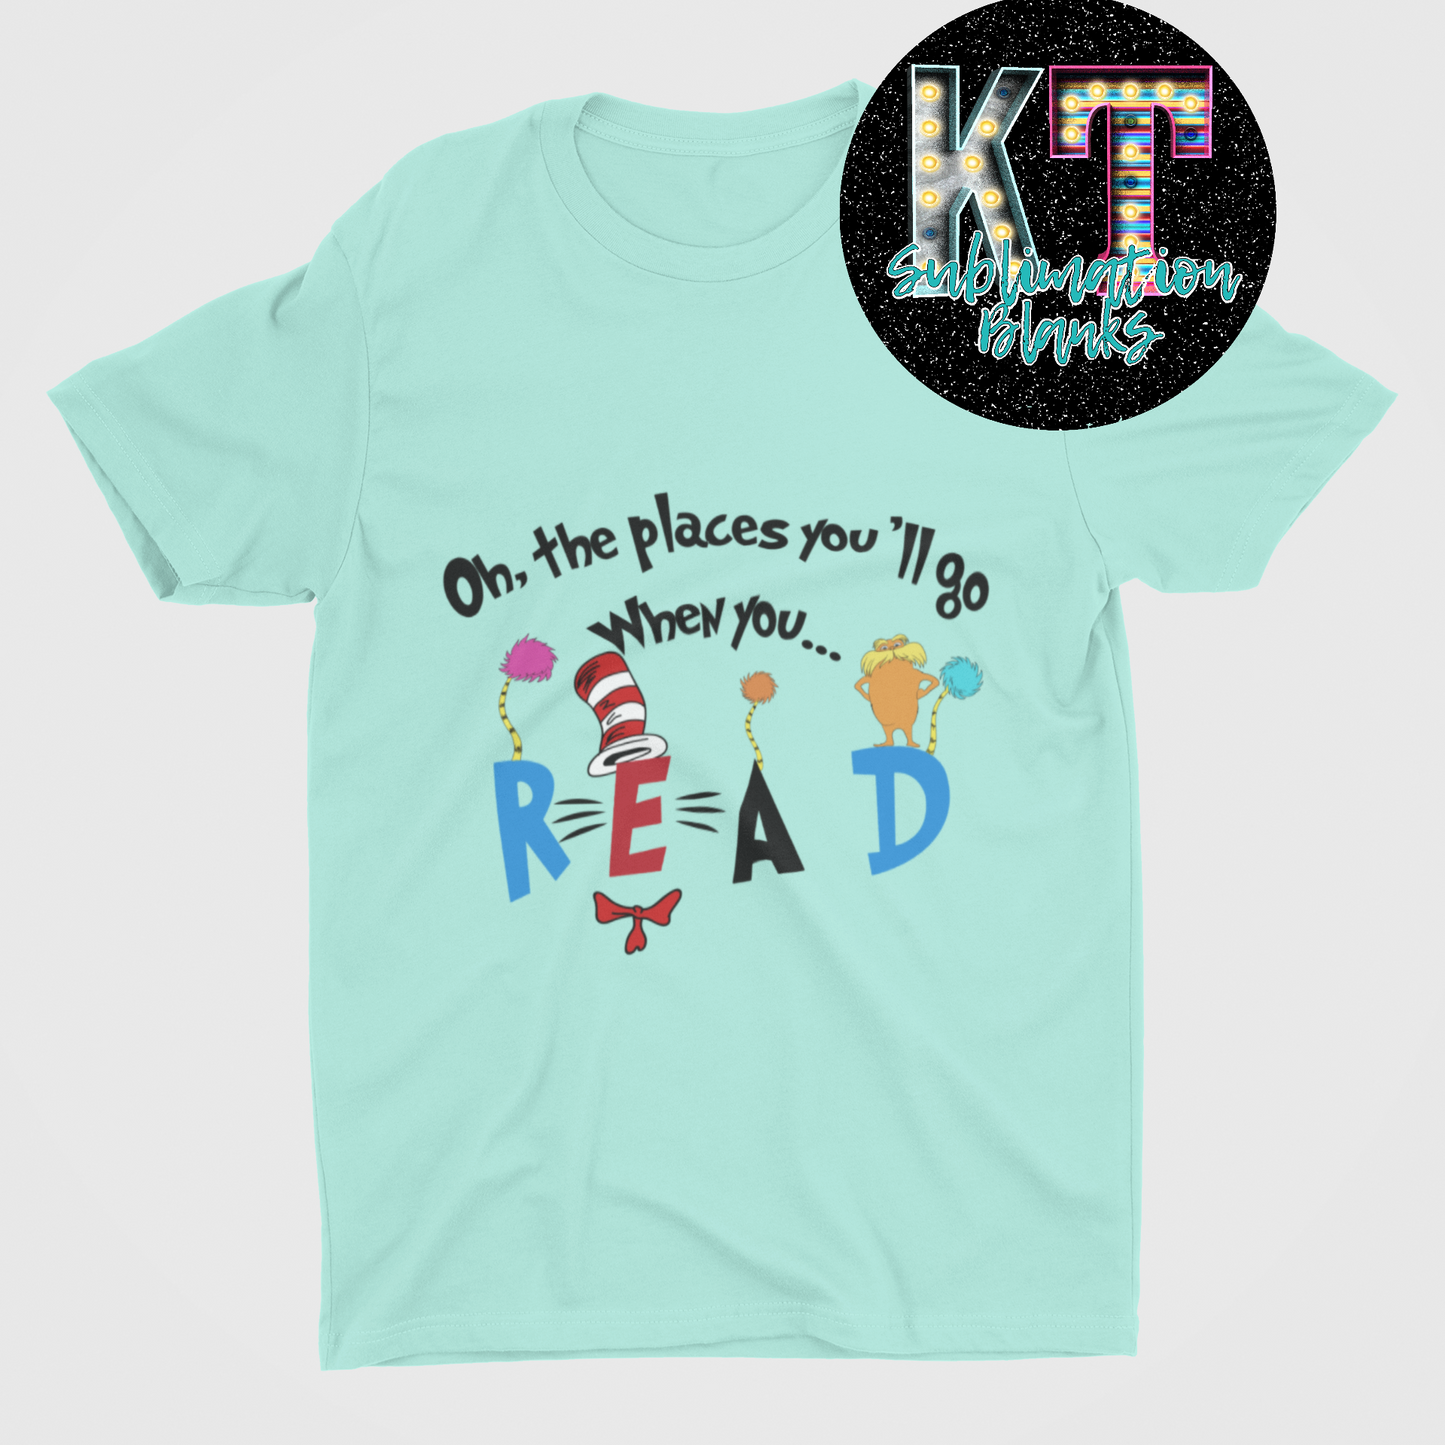 Oh the places you'll go when you READ Unisex T-shirt